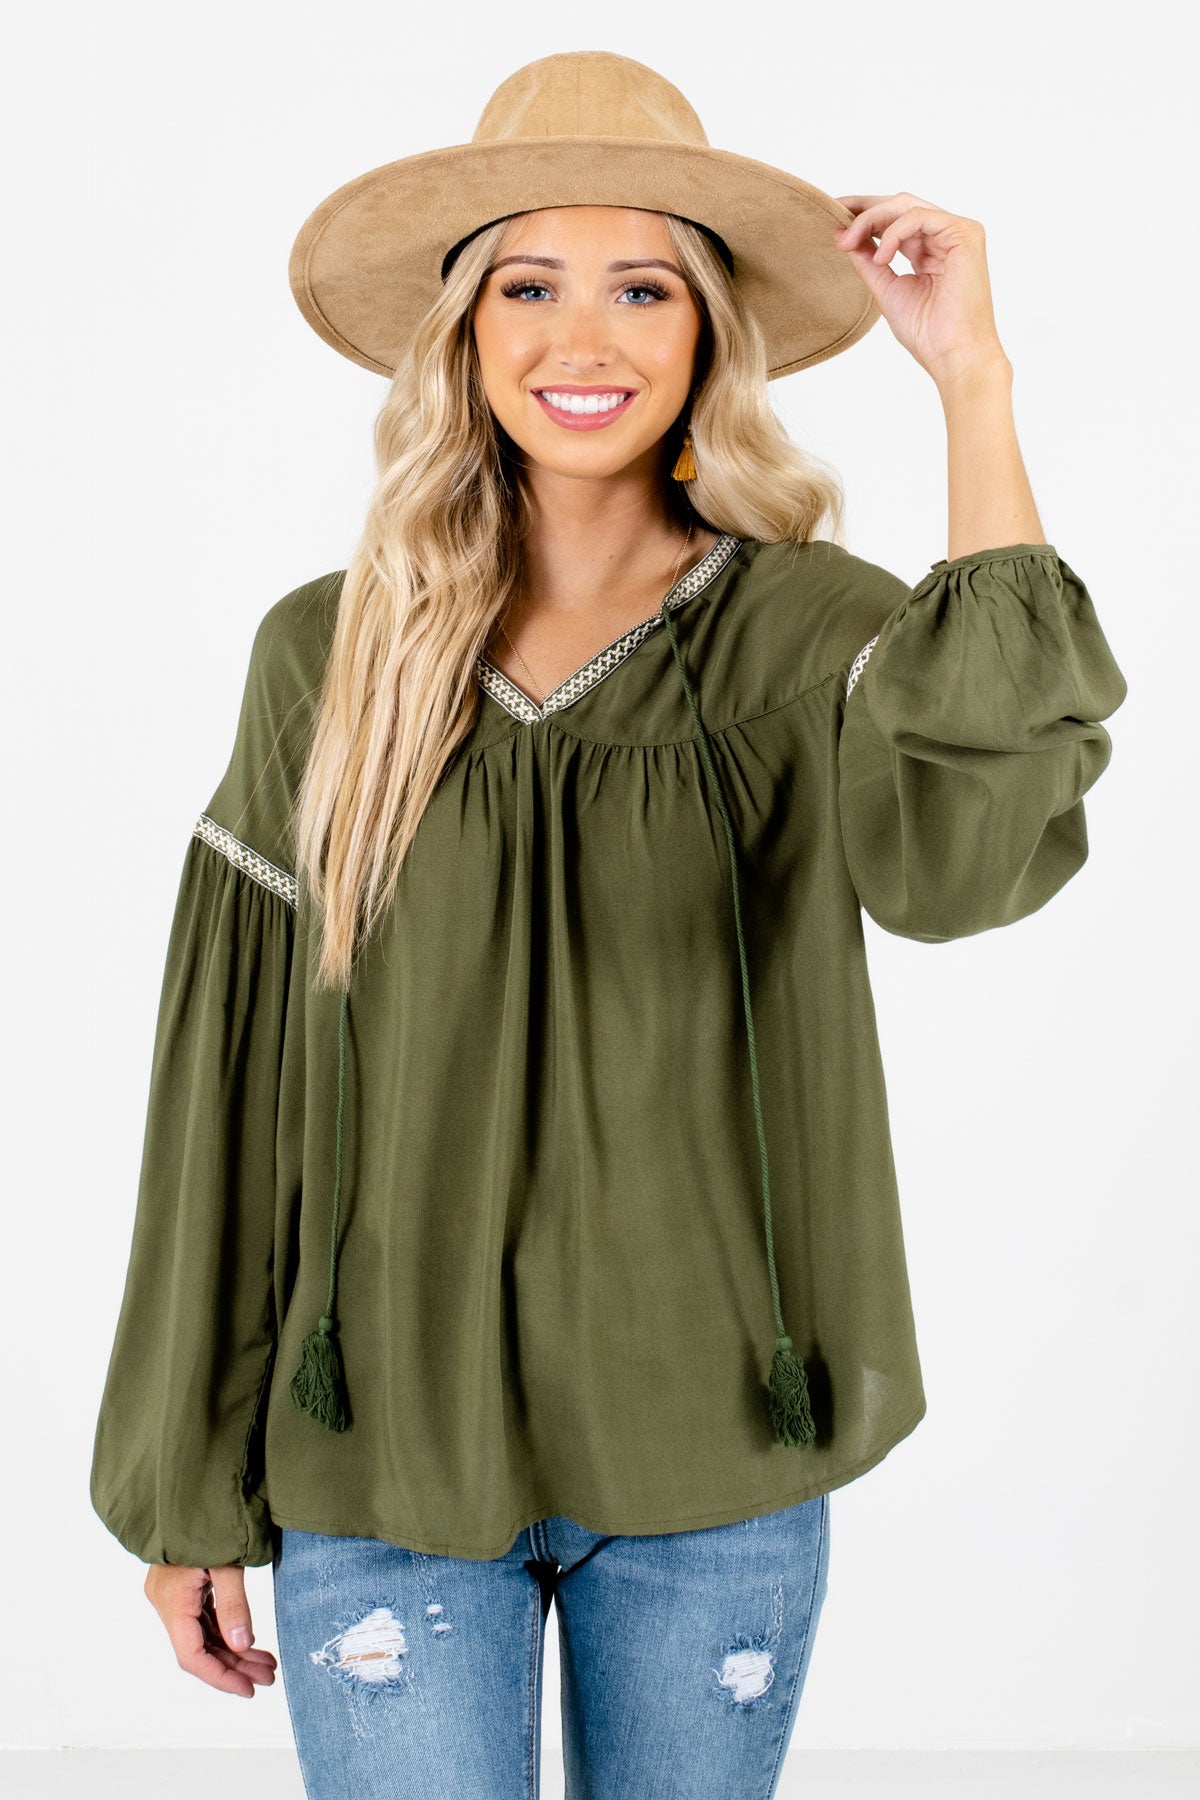 Olive Green Bohemian Peasant Style Boutique Blouses for Women